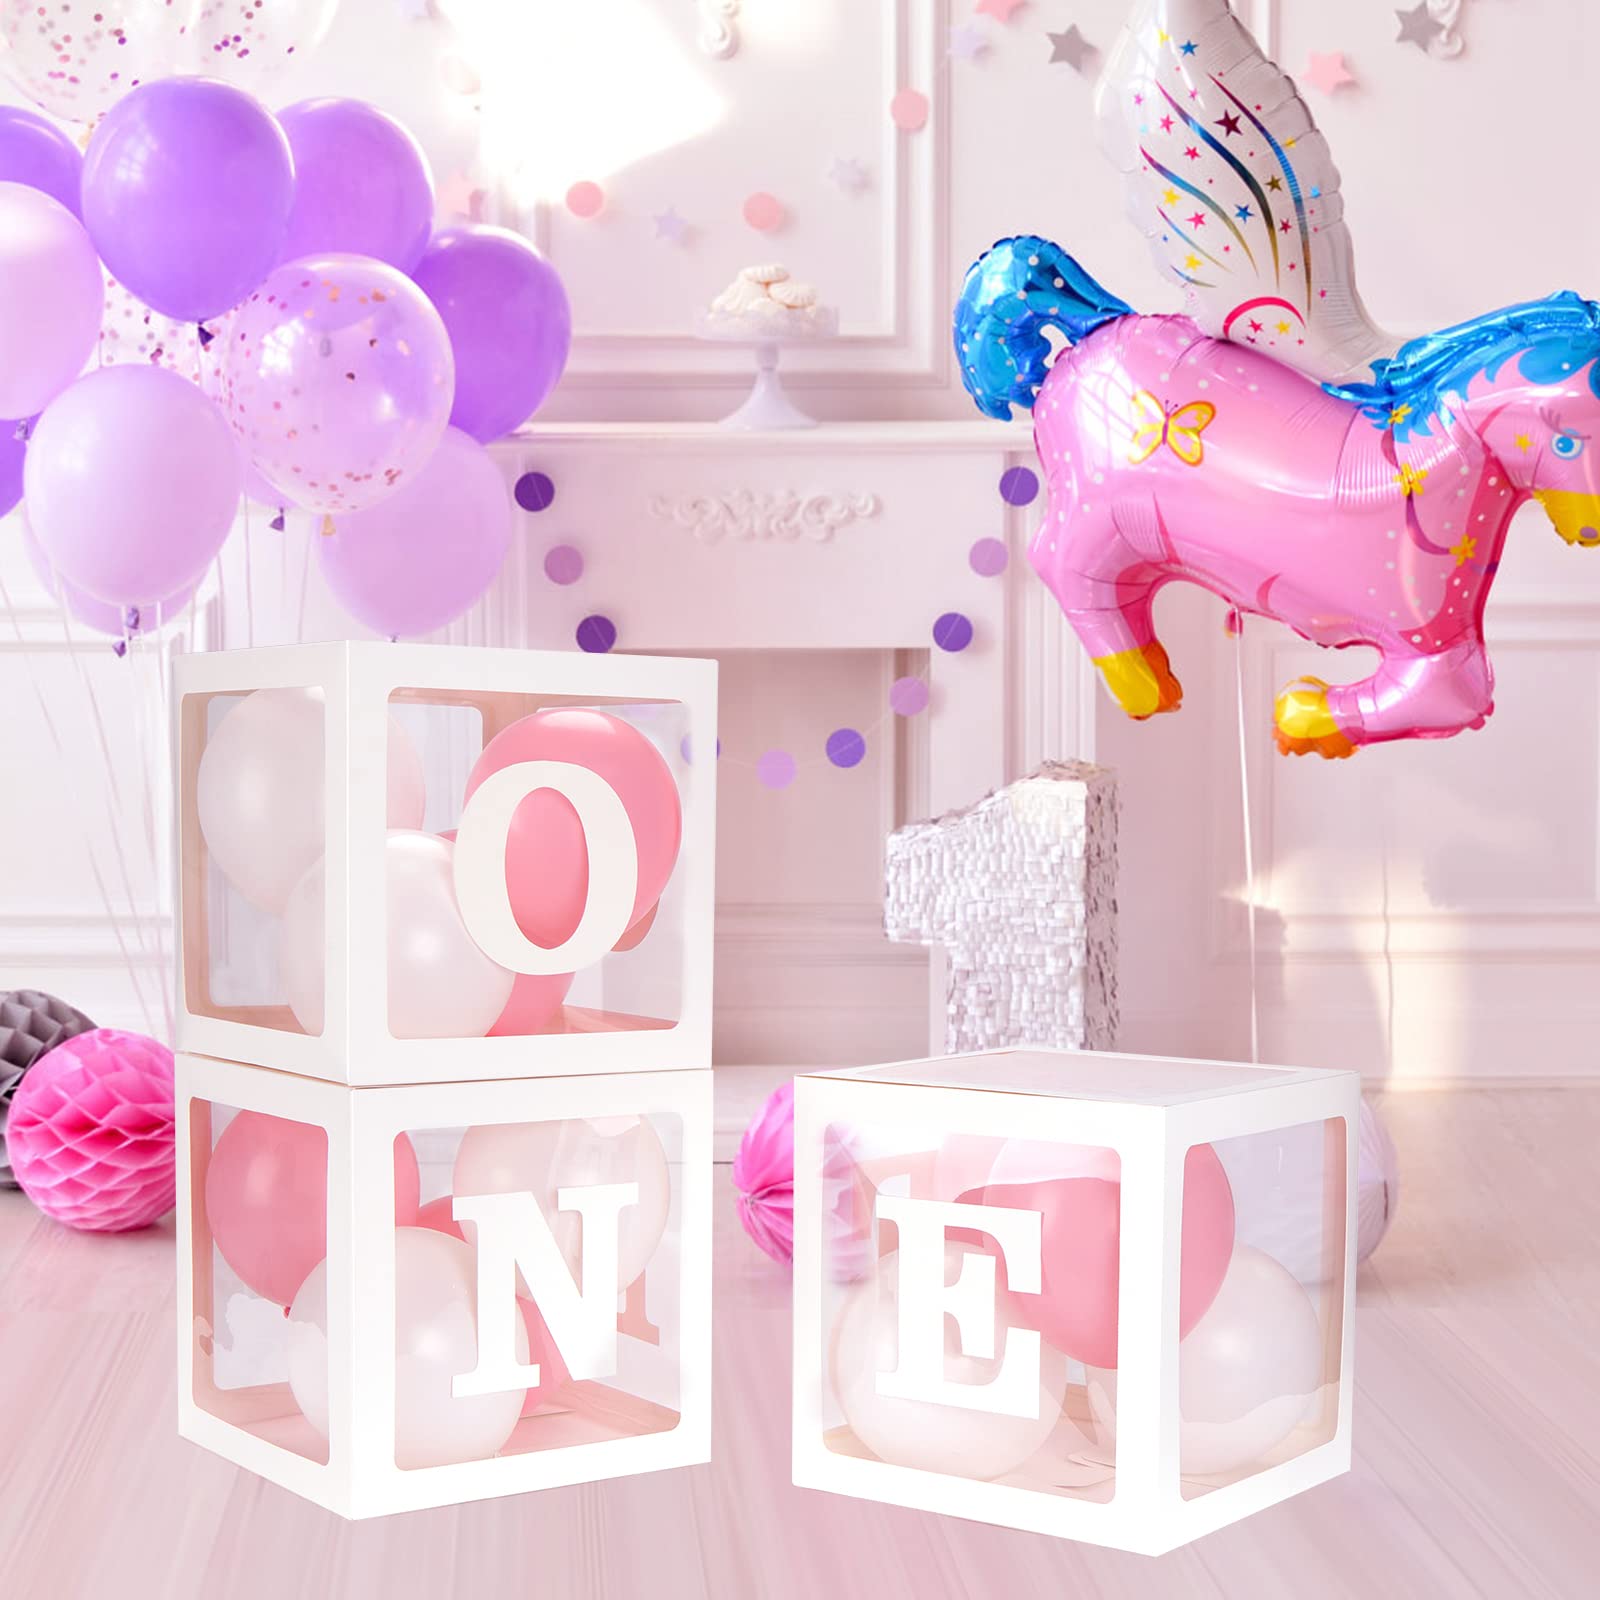 Voircoloria 1st Birthday Decorations for Boys, 3Pcs One Boxes for 1st Birthday for Boy or Girl with ONE Letters for Photoshoot Props 1st Birthday Party(White)